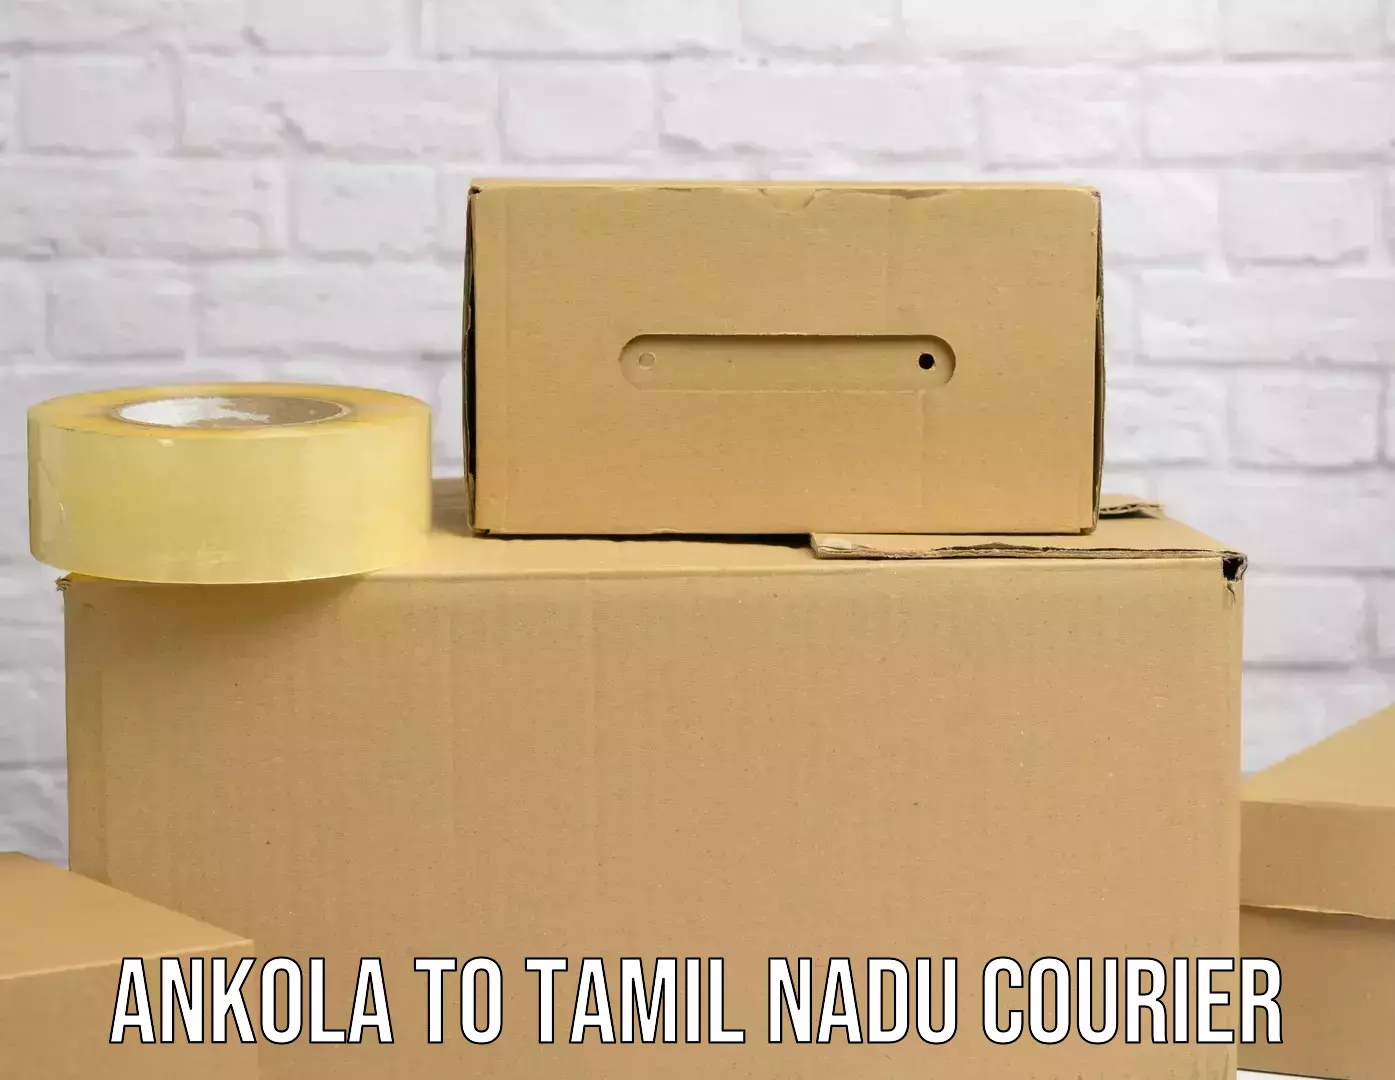 Bulk shipping discounts Ankola to Meenakshi Academy of Higher Education and Research Chennai